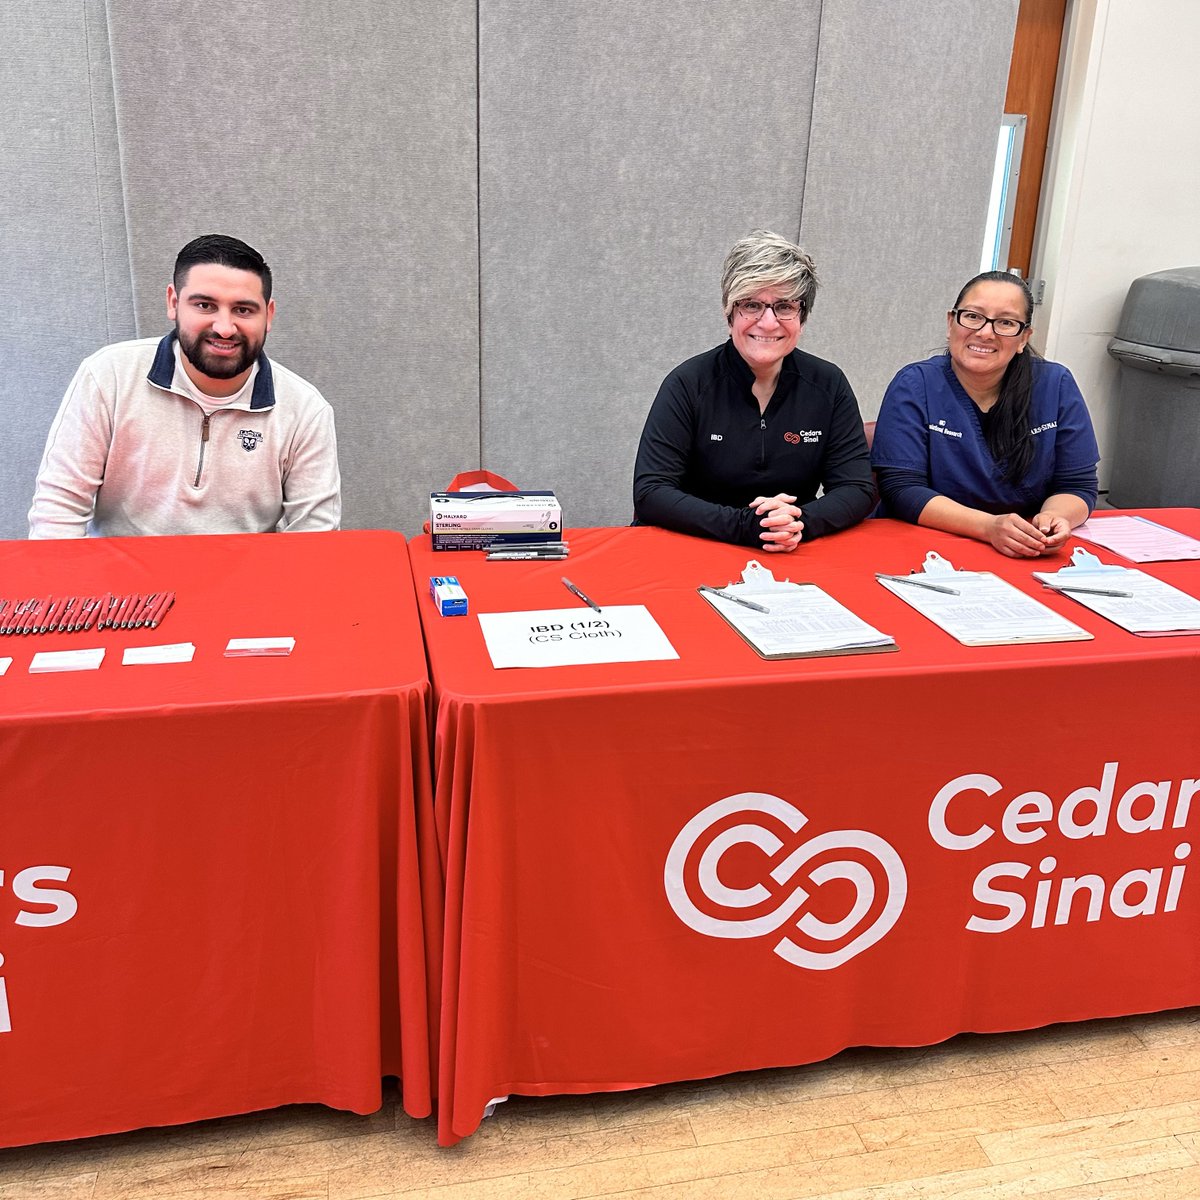 Kevin Rodriguez, Maria Salas, and Jennifer Davis representing @IBDCedarsSinai at today's Culver City Senior Center Health Fair. FREE health screenings for the public in partnership with the Culver City Senior Center.